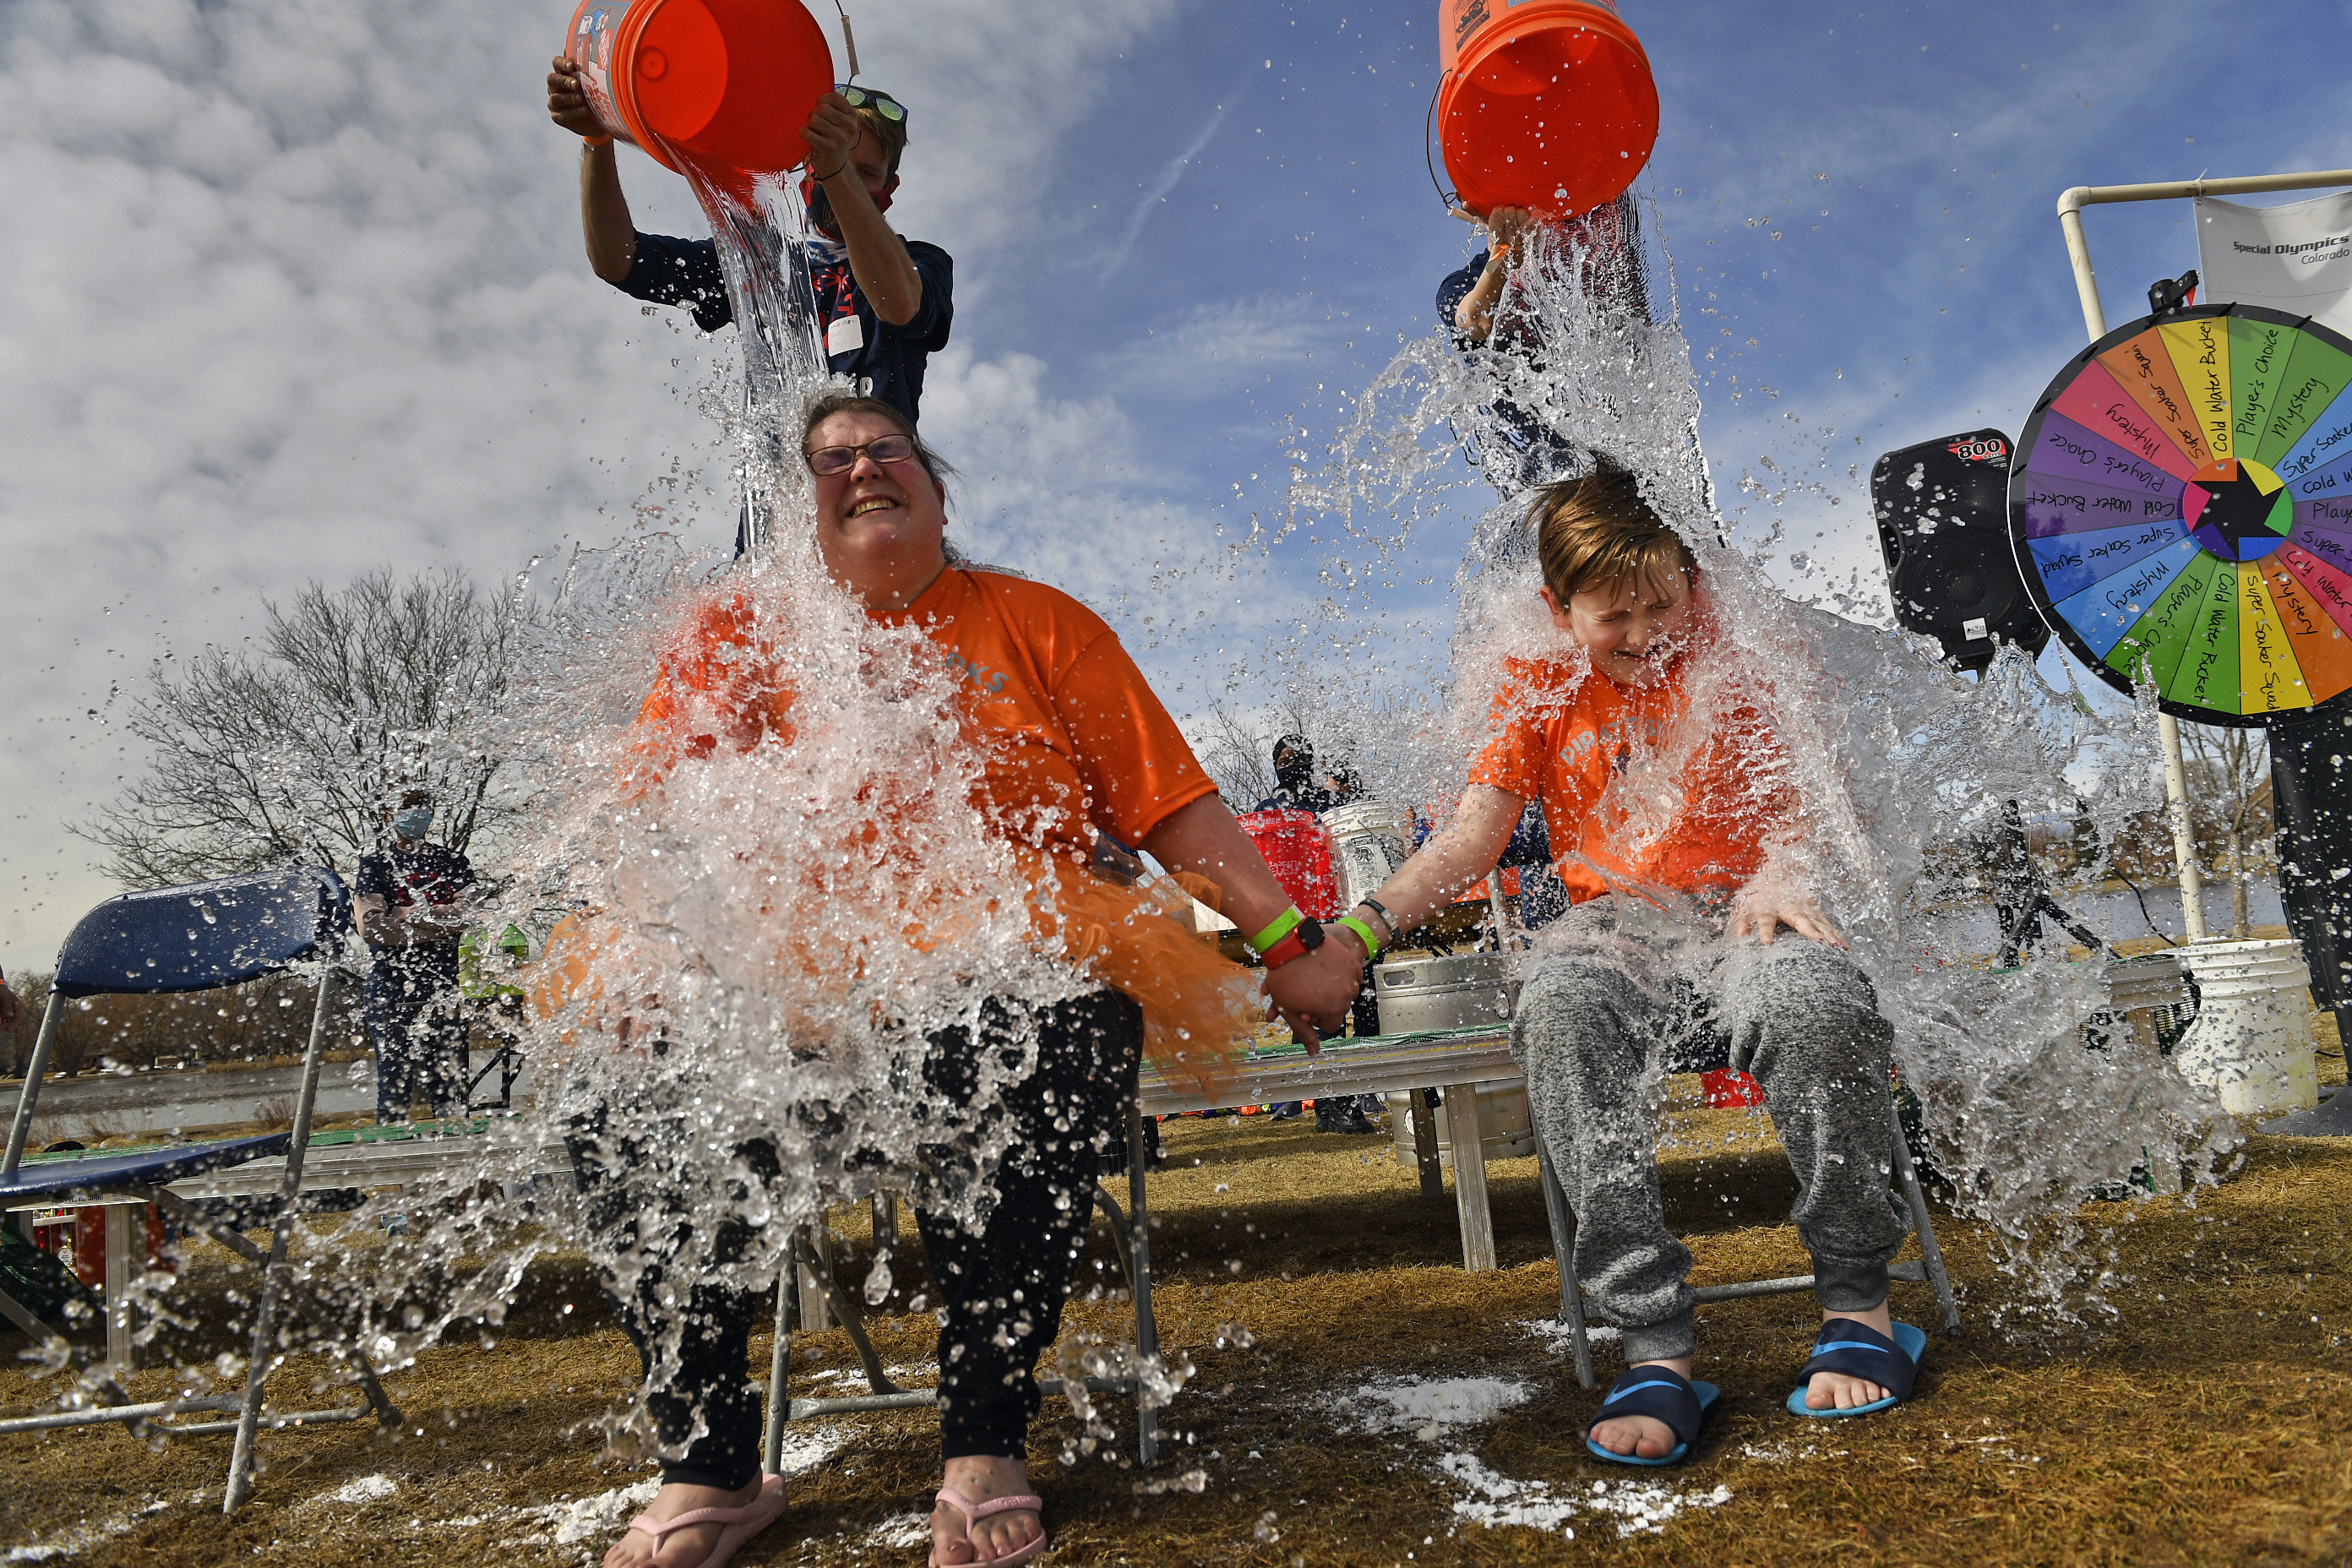 Sarah Ellis, left, and her son Topher, 10, get doused with buckets of cold water as they take part in the Denver Polar Plunge to support Special Olympics on March 7, 2021